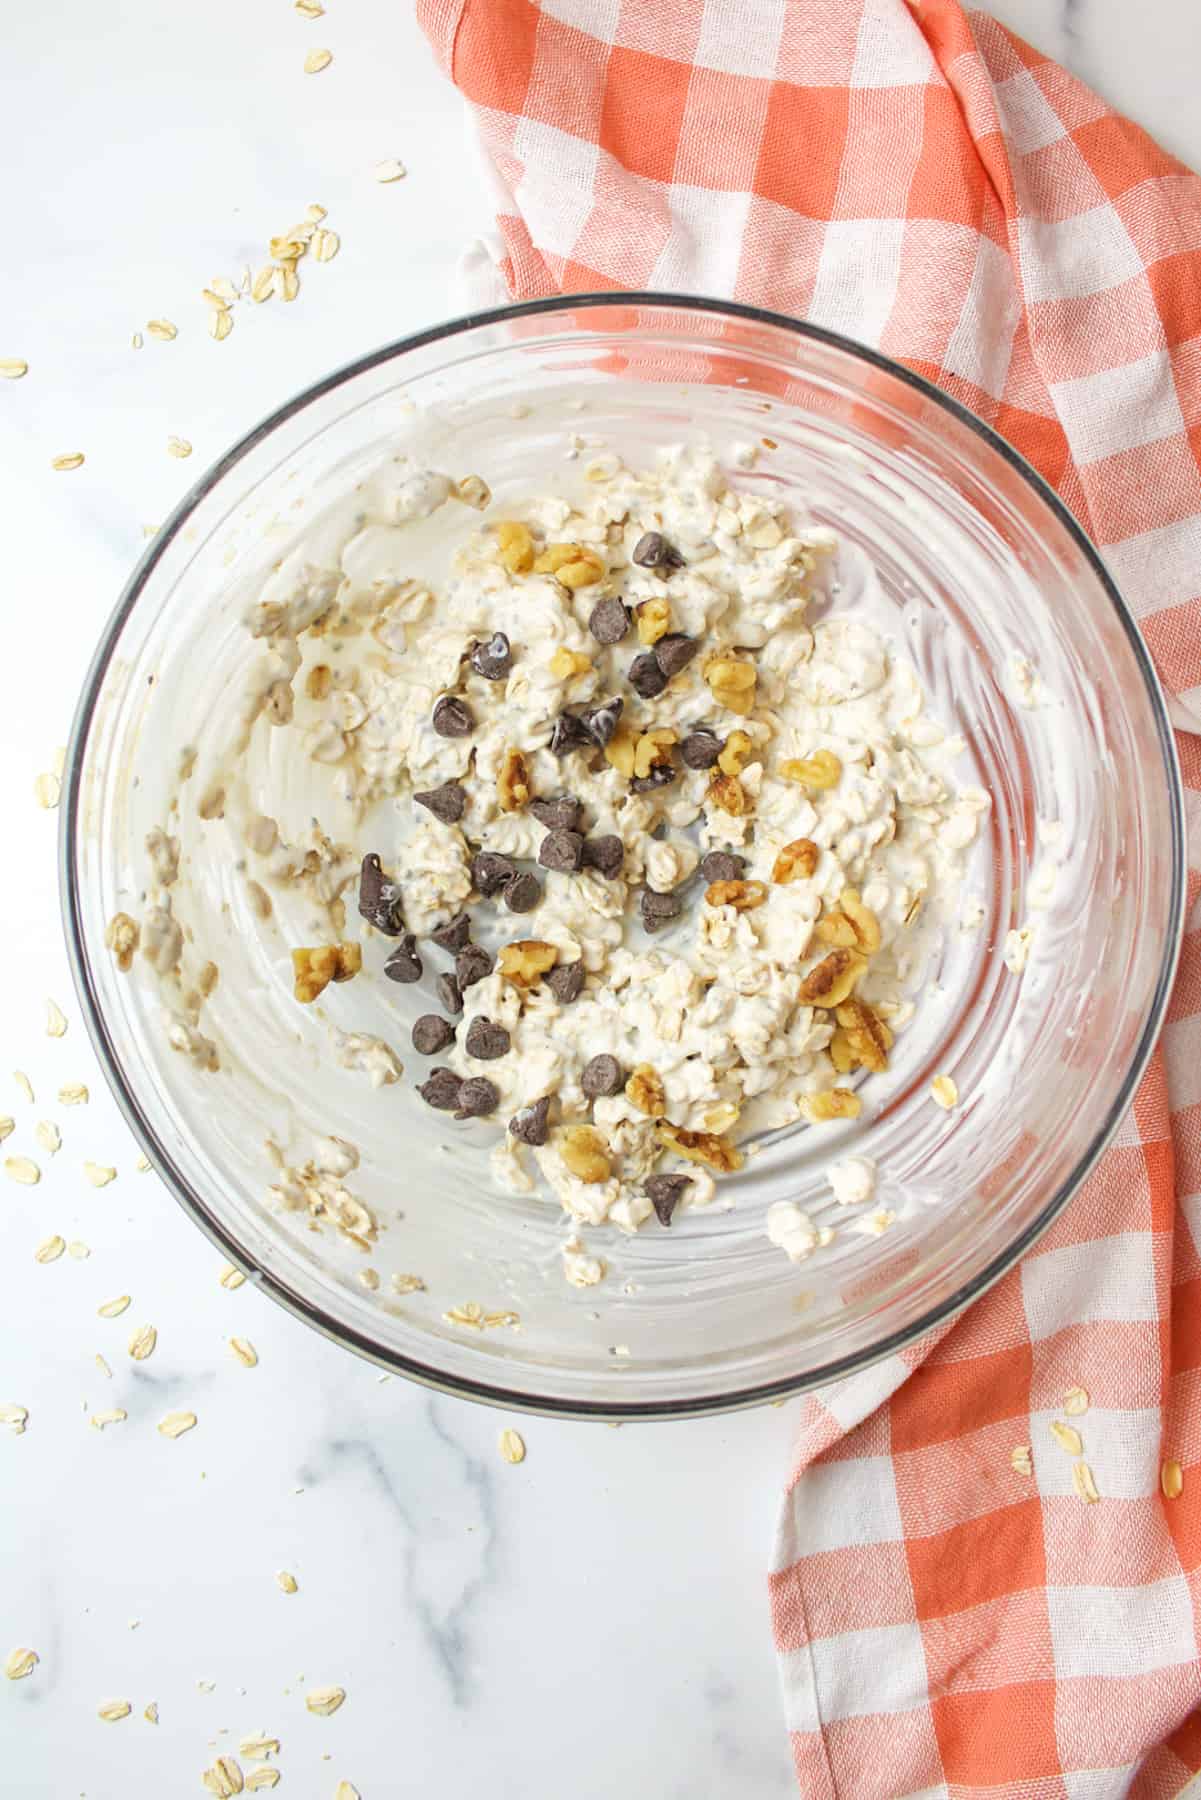 overnight oats mixture with walnuts and chocolate chips in a bowl